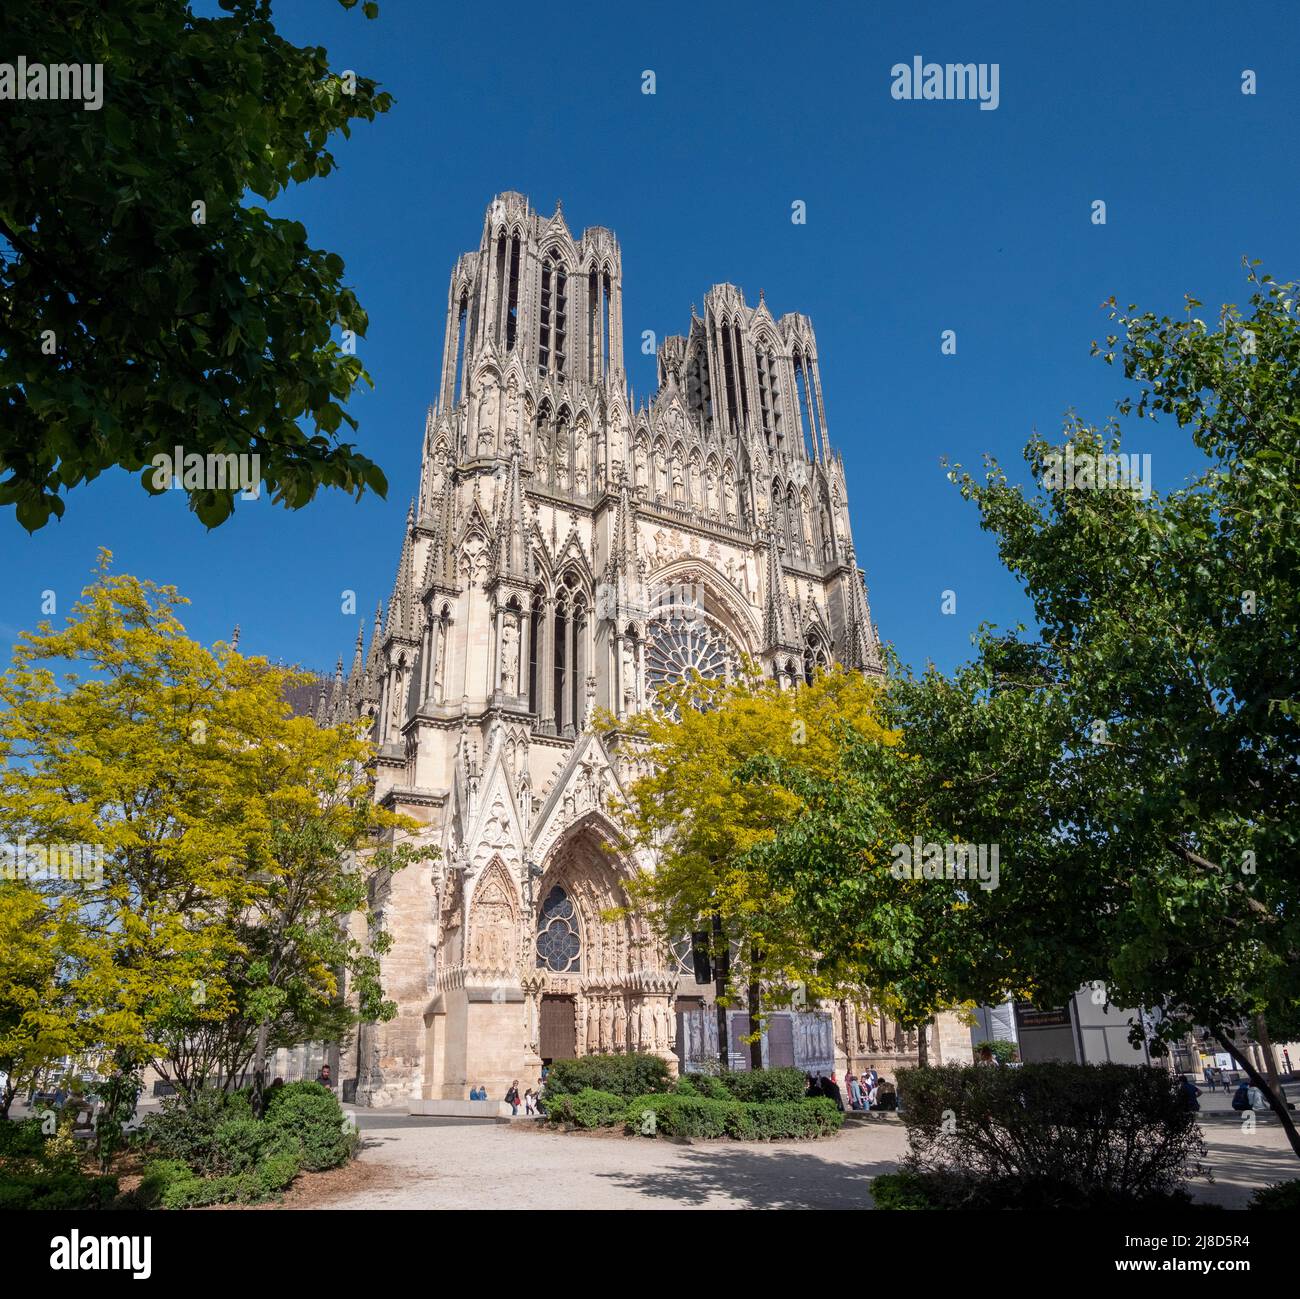 The image is of the famous 13th century Cathedral Notre Dame des Reims famed for its association with Joan of Arc, that overlooks the city square. Stock Photo